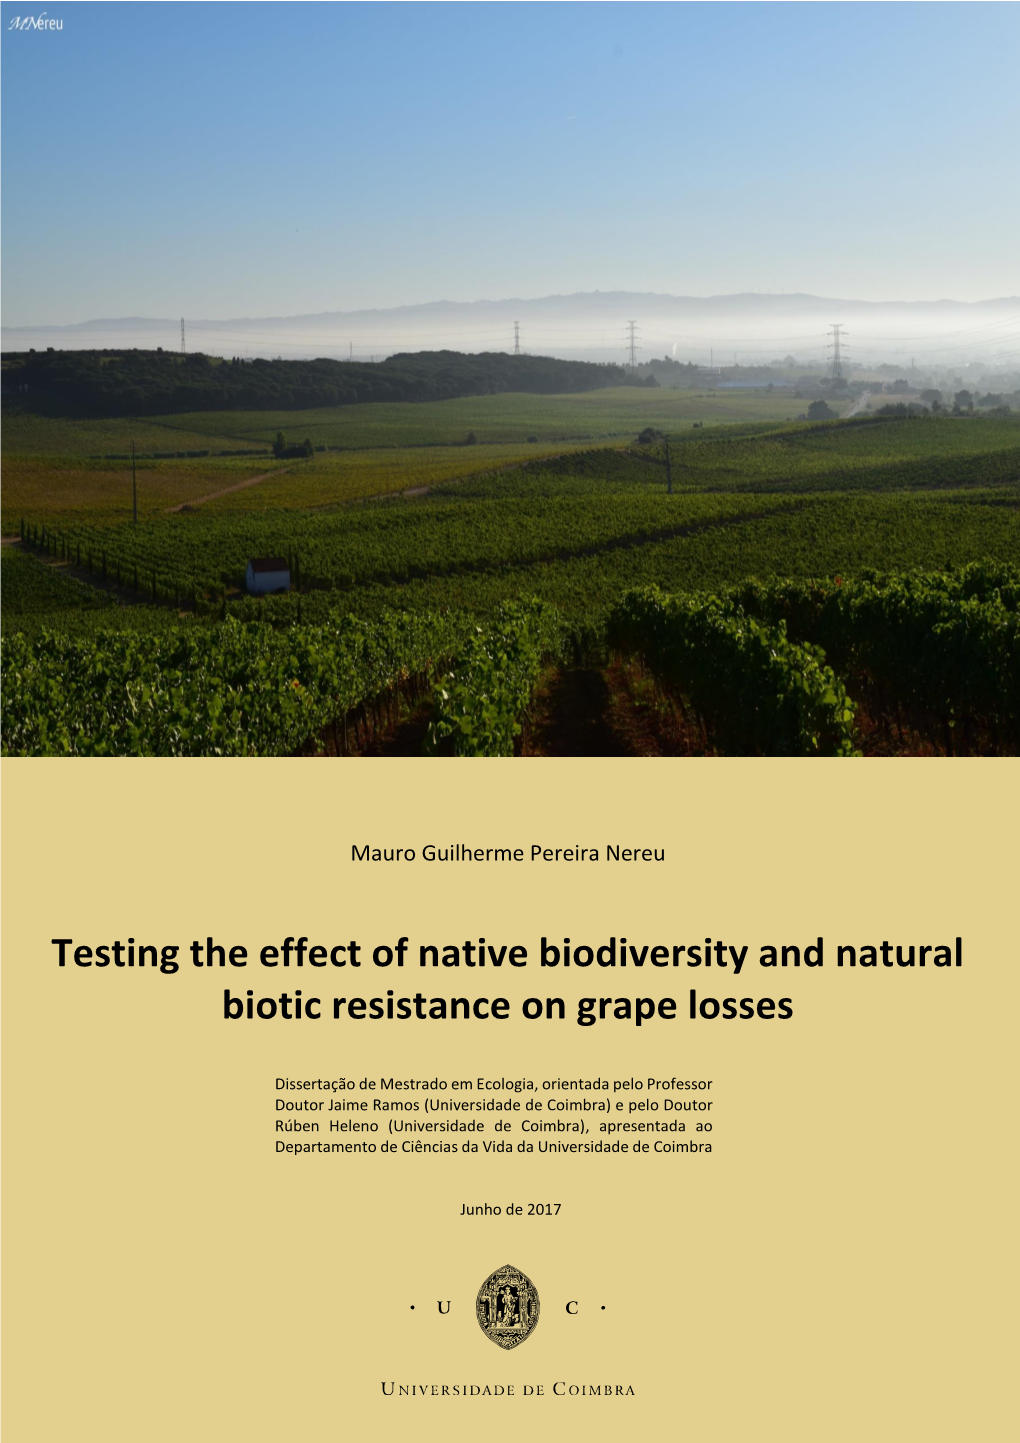 Testing the Effect of Native Biodiversity and Natural Biotic Resistance on Grape Losses